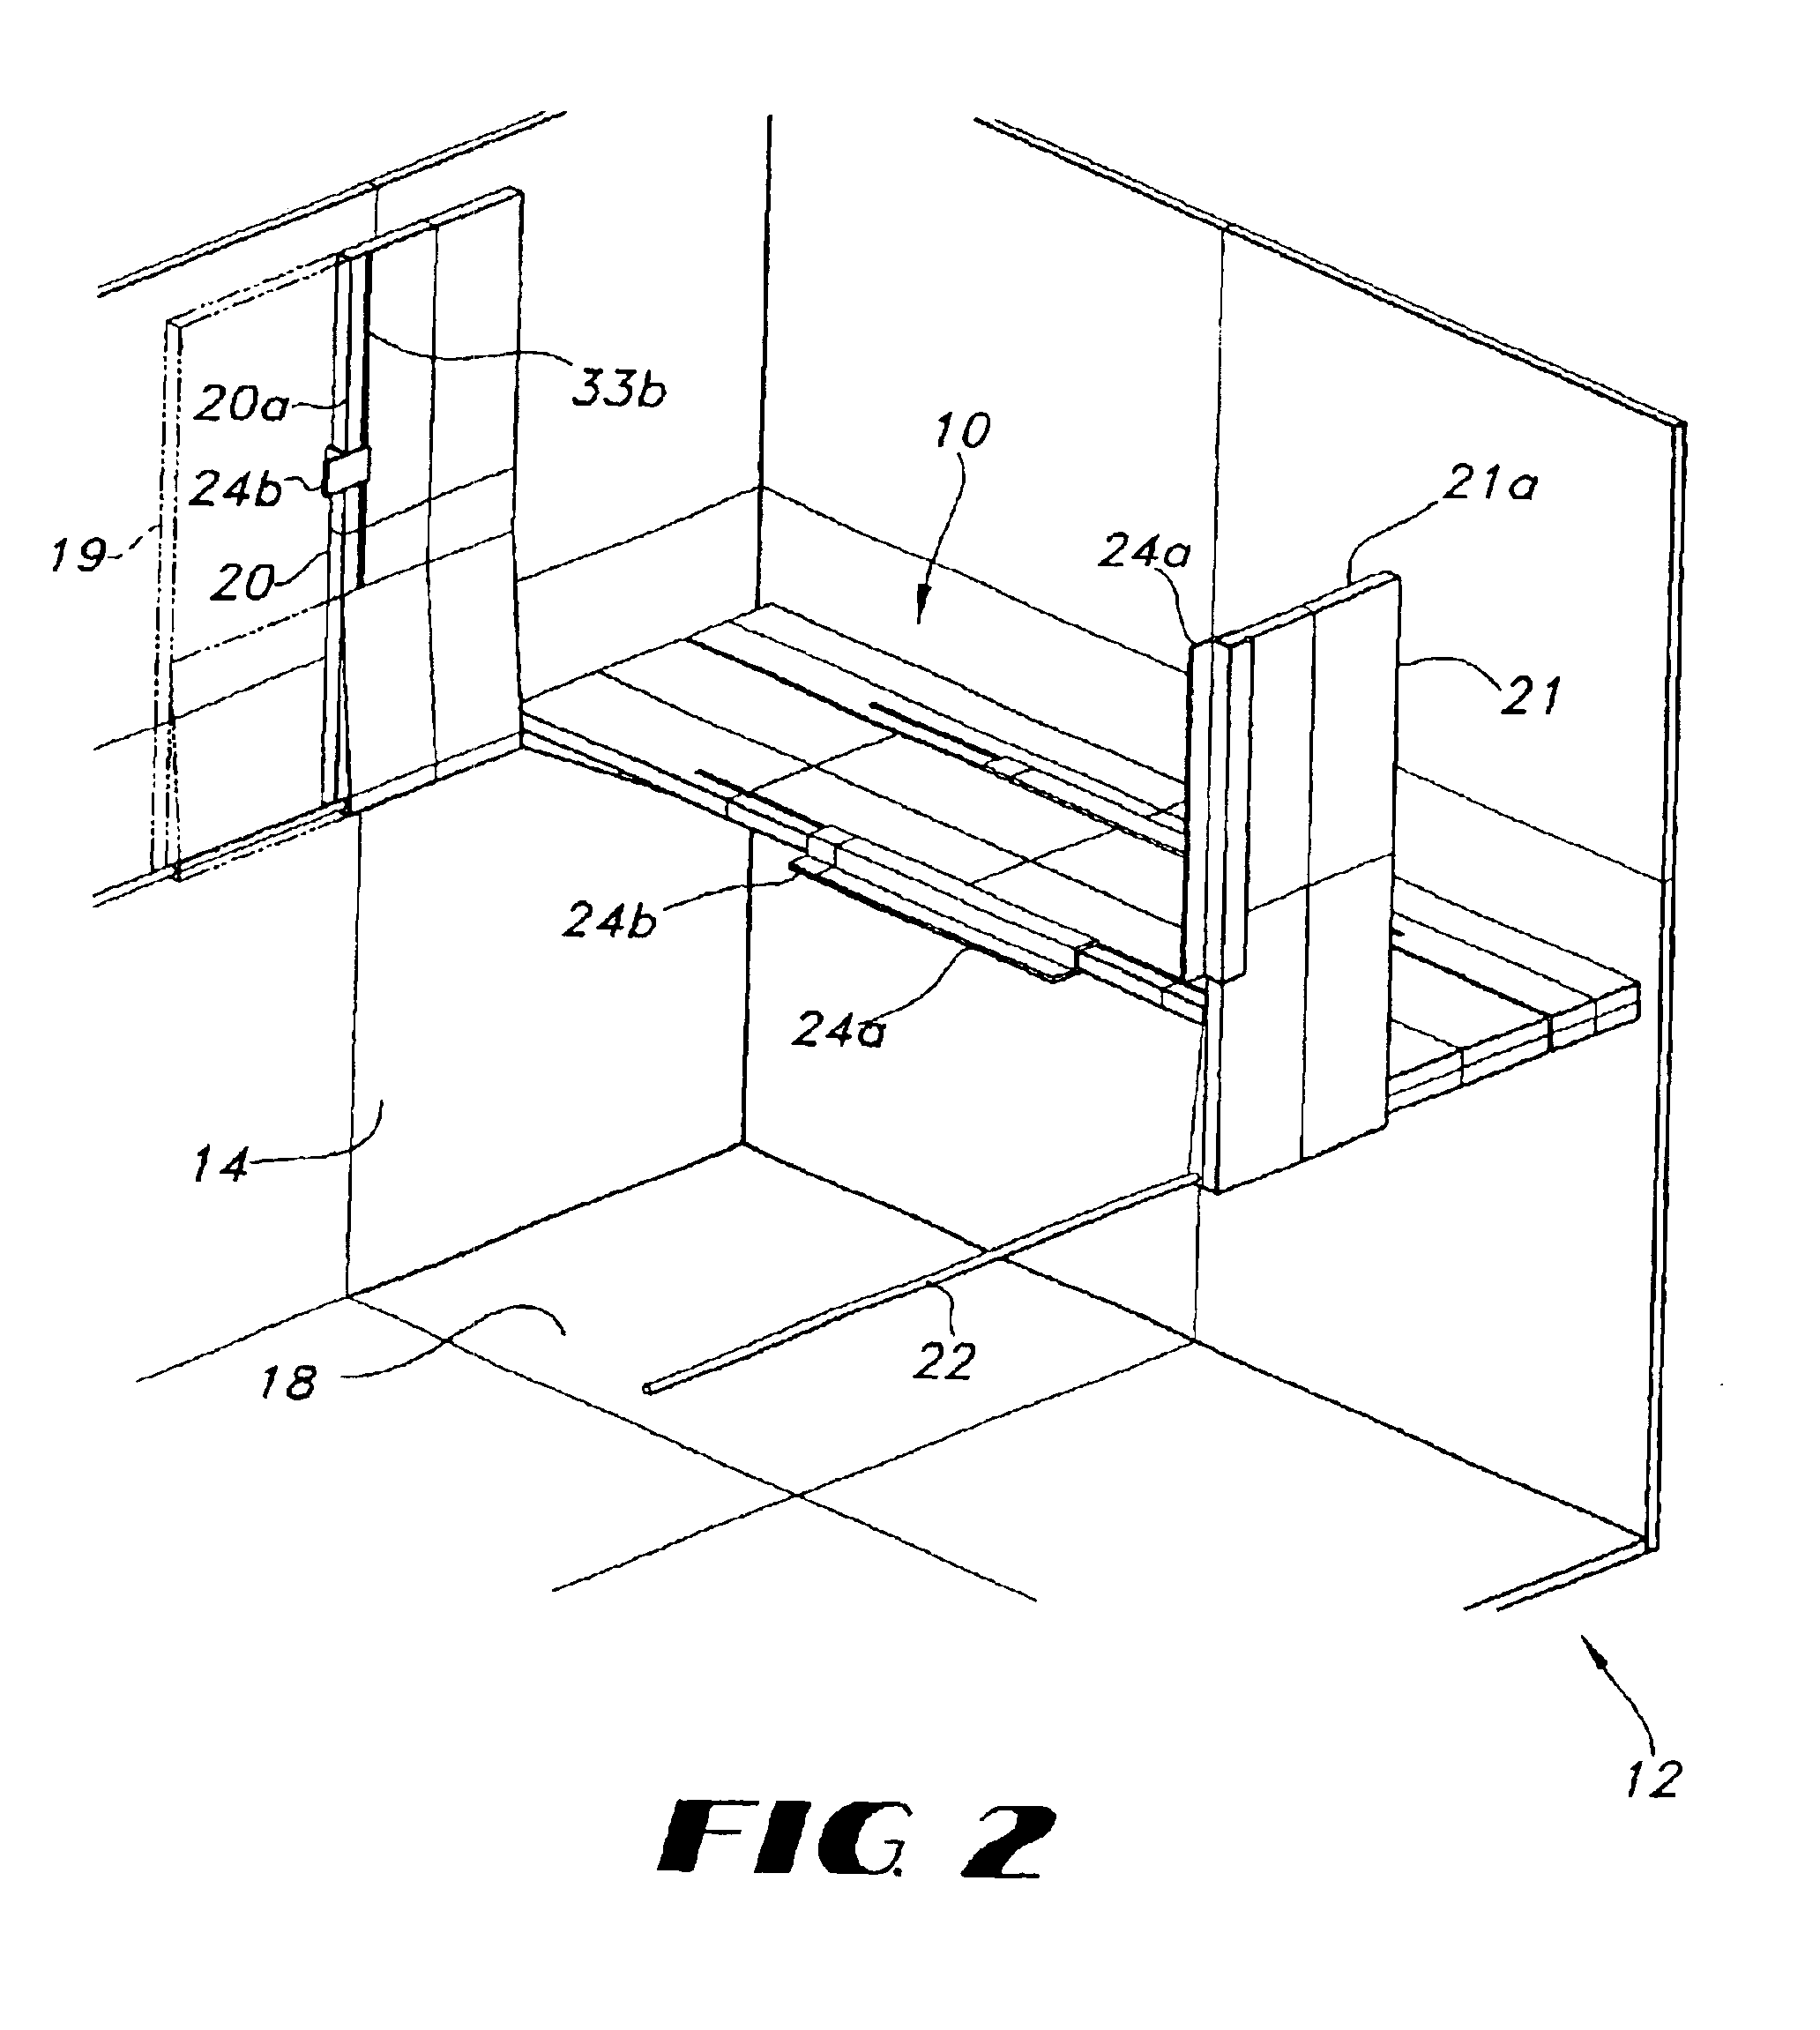 Hinge and support system for an intermediate deck in a trailer